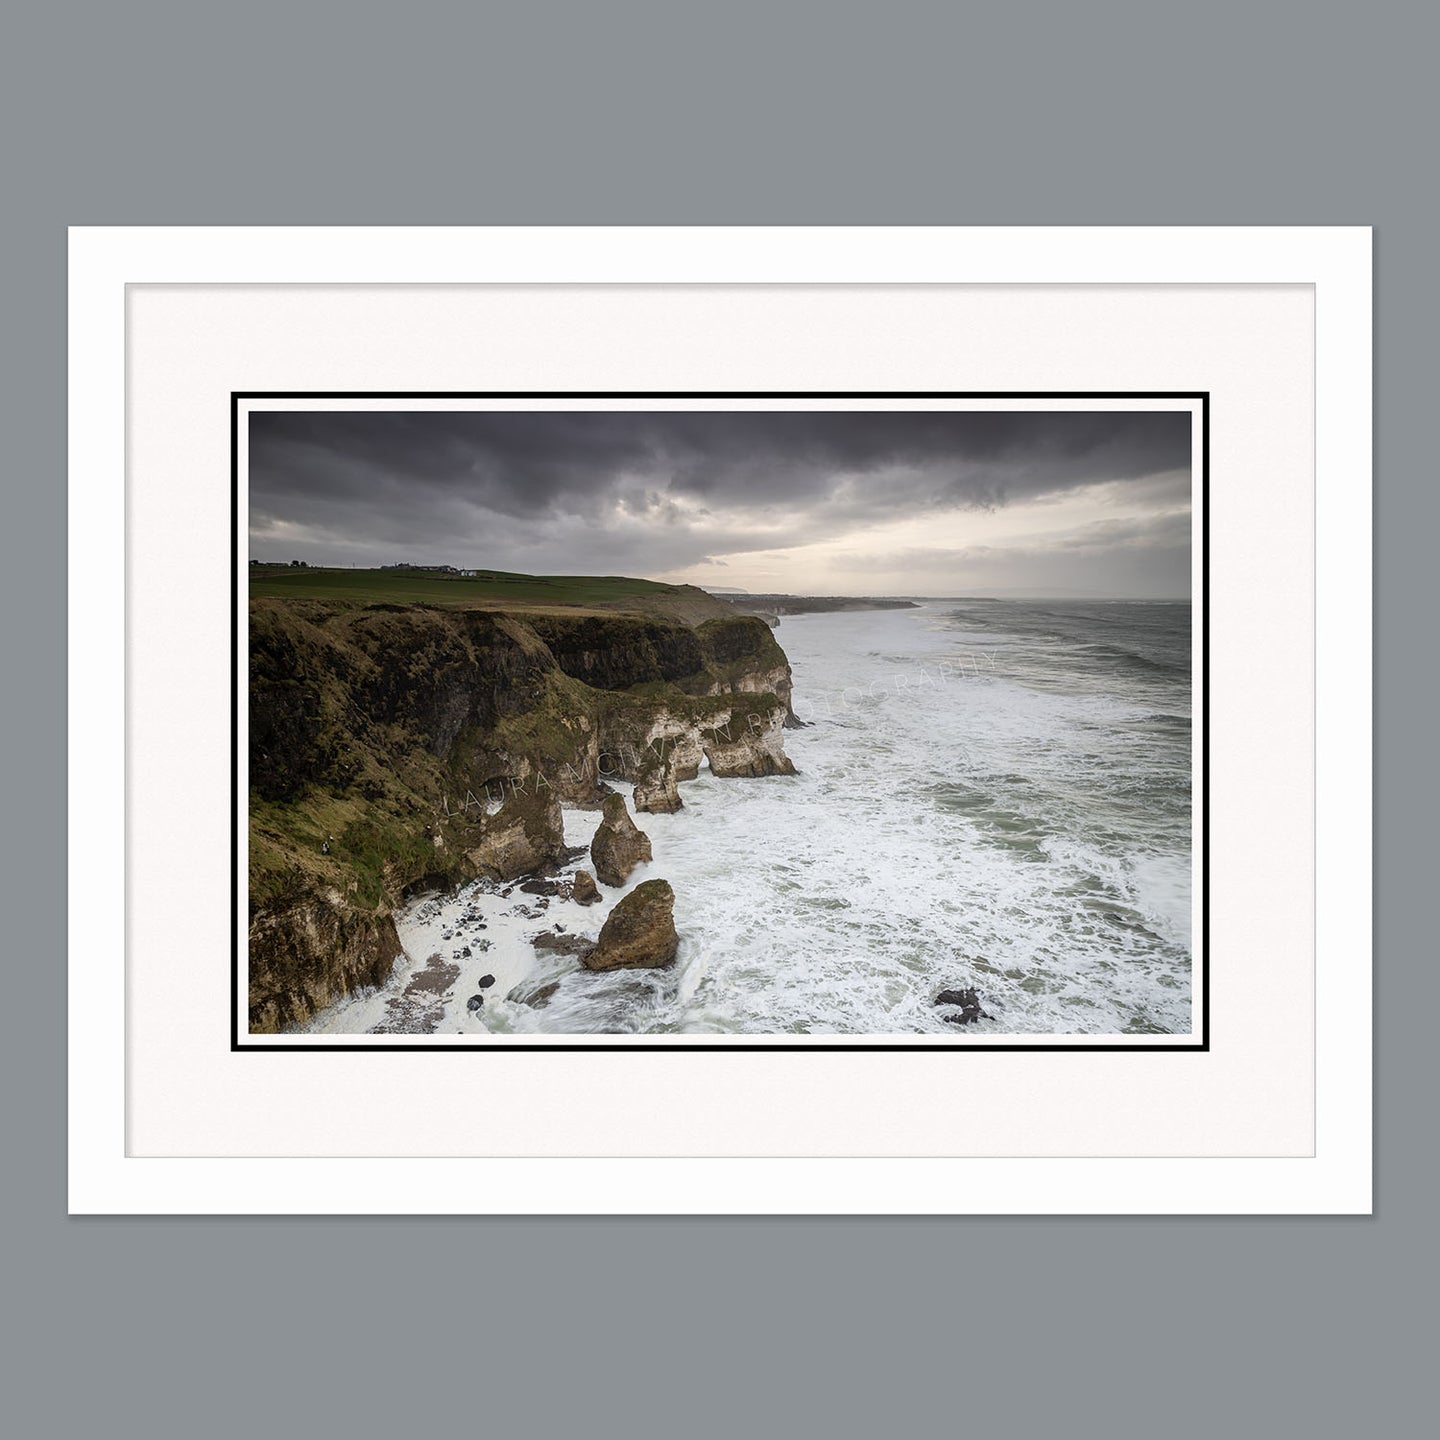 'When the clouds appear' - Magheracross, Portrush